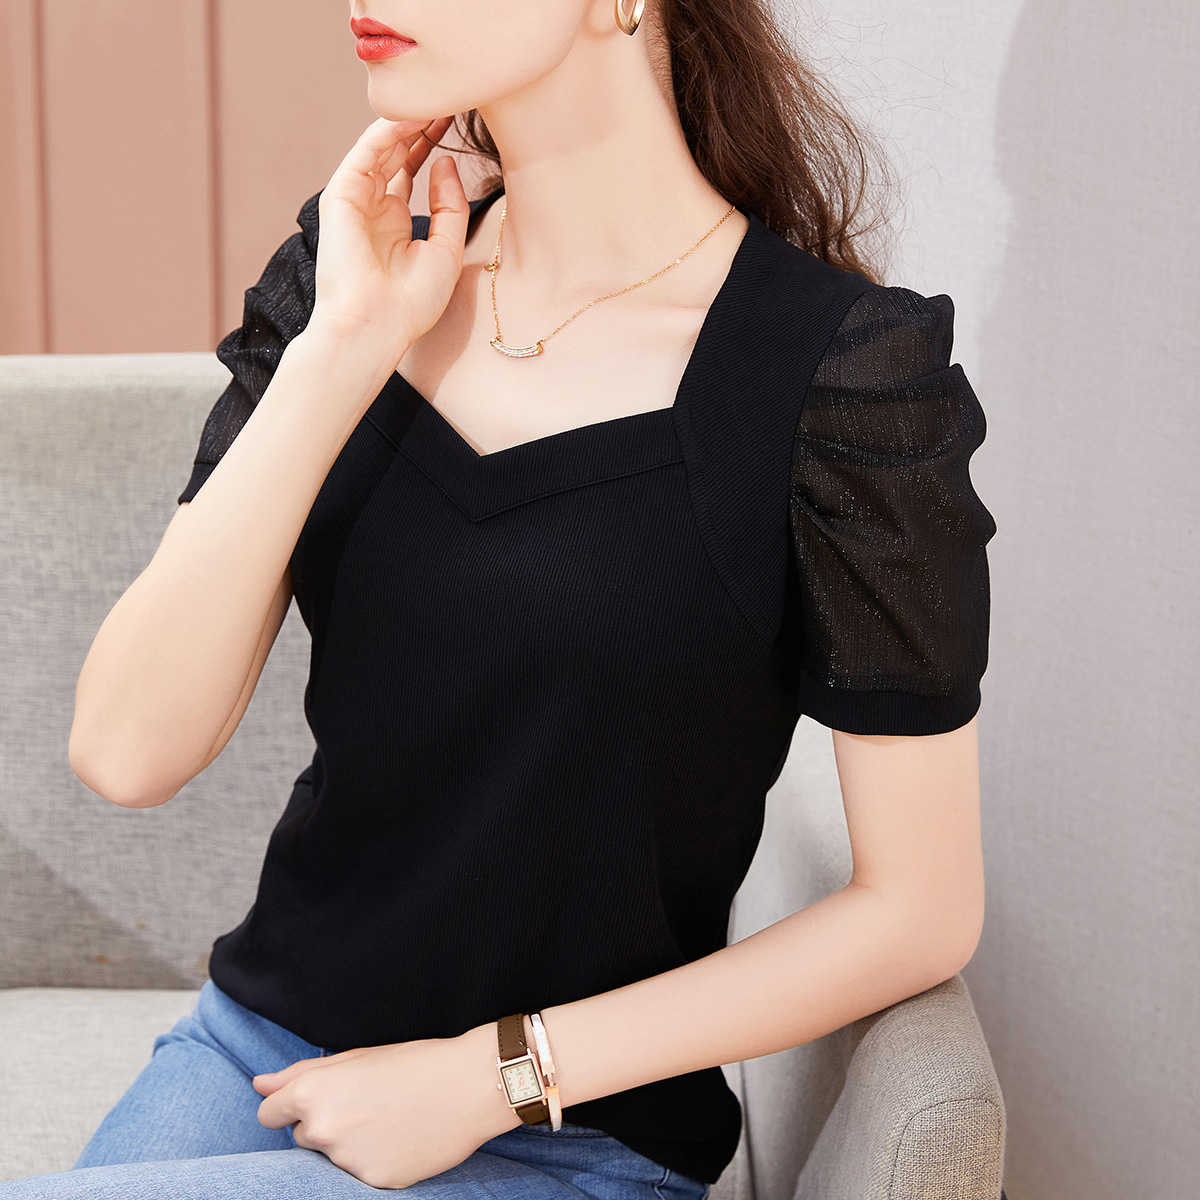 Clothes Women's T-shirt Women's 2022 New Summer Short-sleeved T-shirt French Palace Style Puff Sleeve Top Women's Autumn